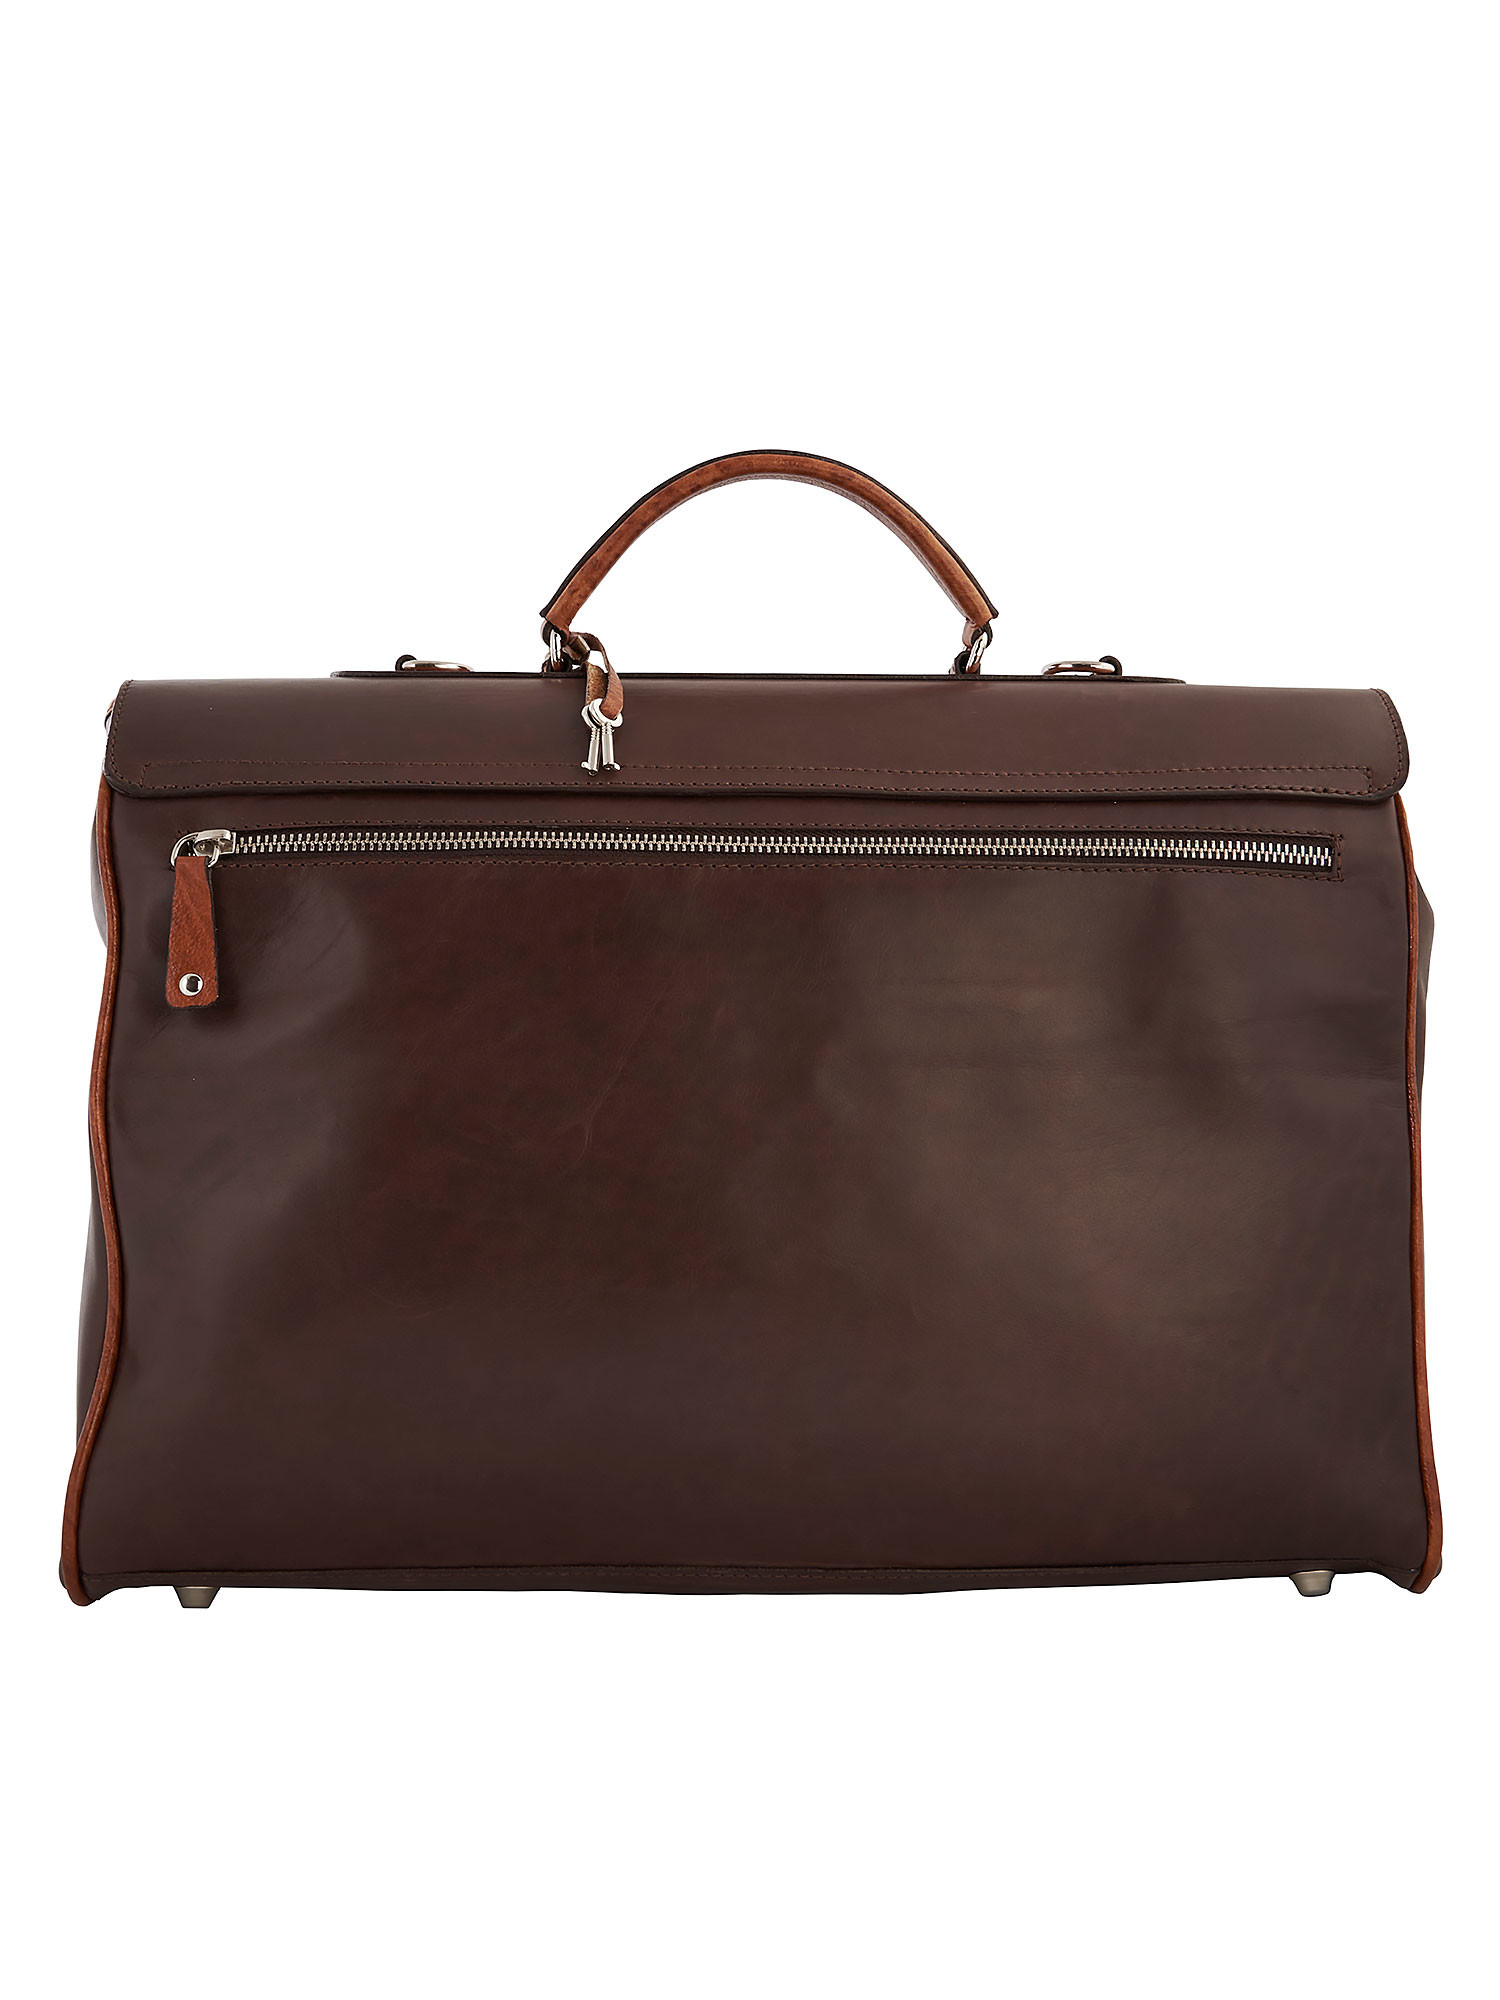 Mariani work bag for men in brown leather with shoulder strap